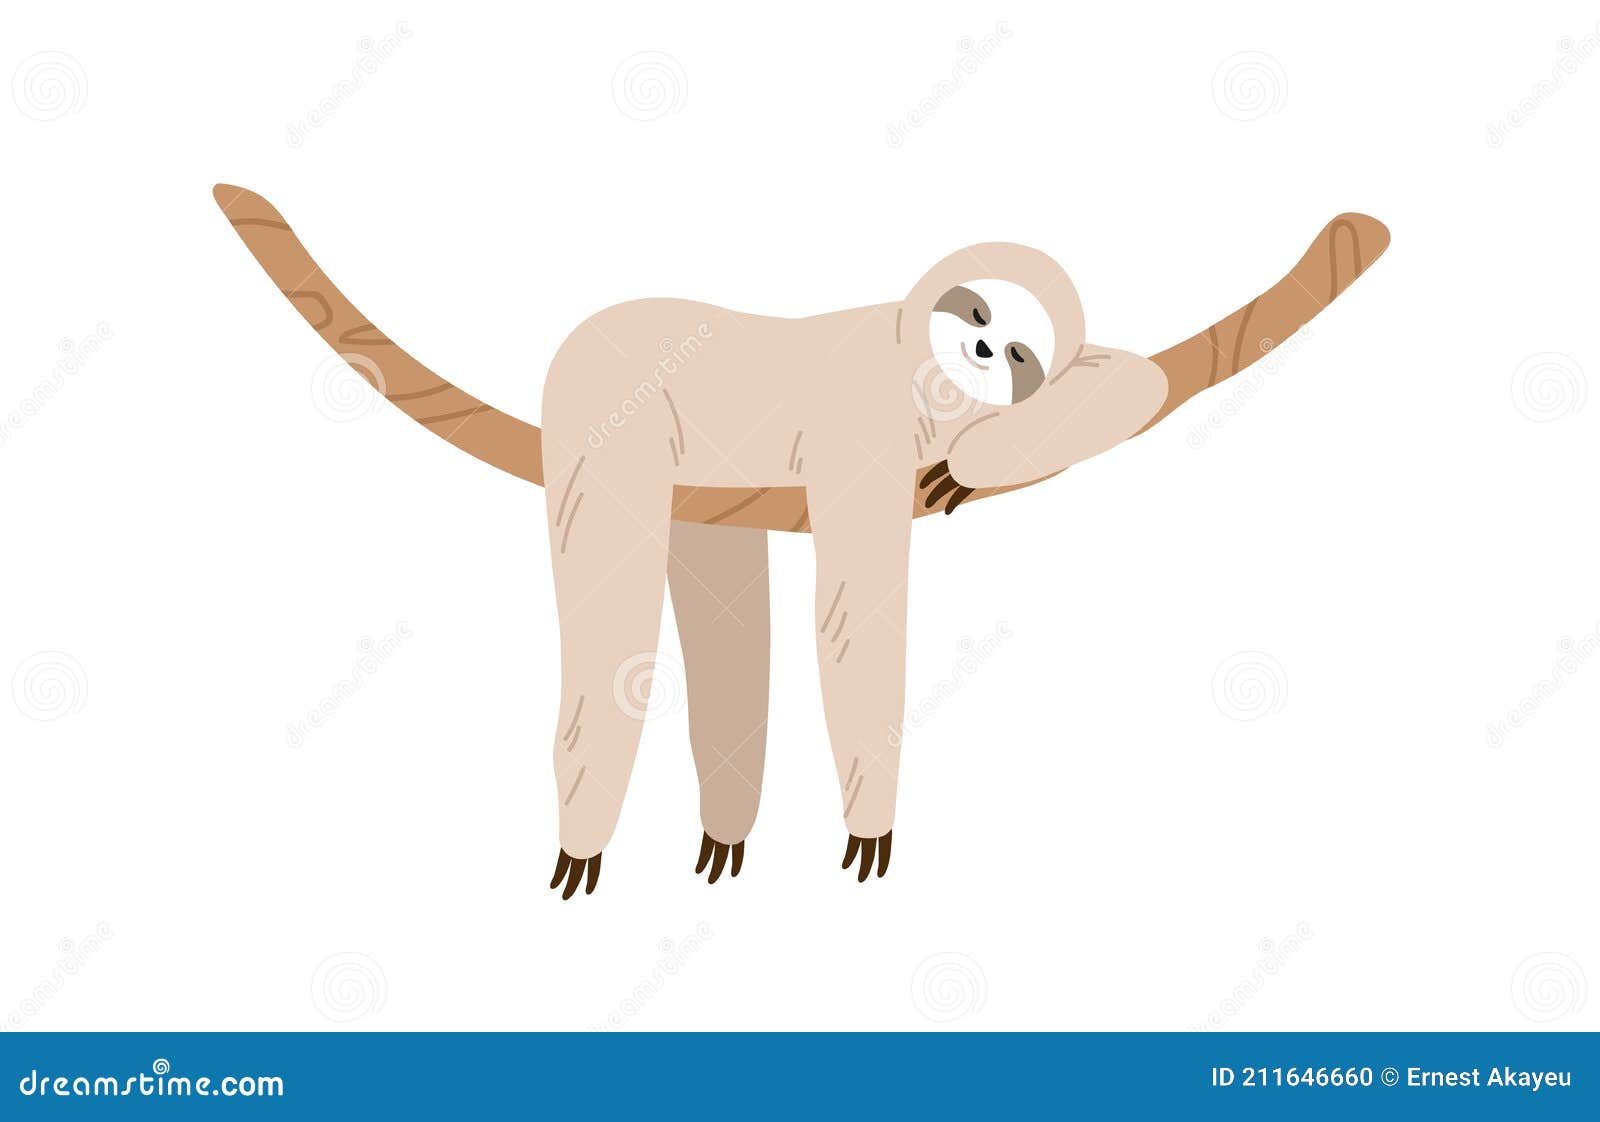 Cute and Funny Sloth Hanging on Tree Branch and Sleeping. Slow and Lazy  Animal Relaxing on Liana Stock Vector - Illustration of graphic, isolated:  211646660